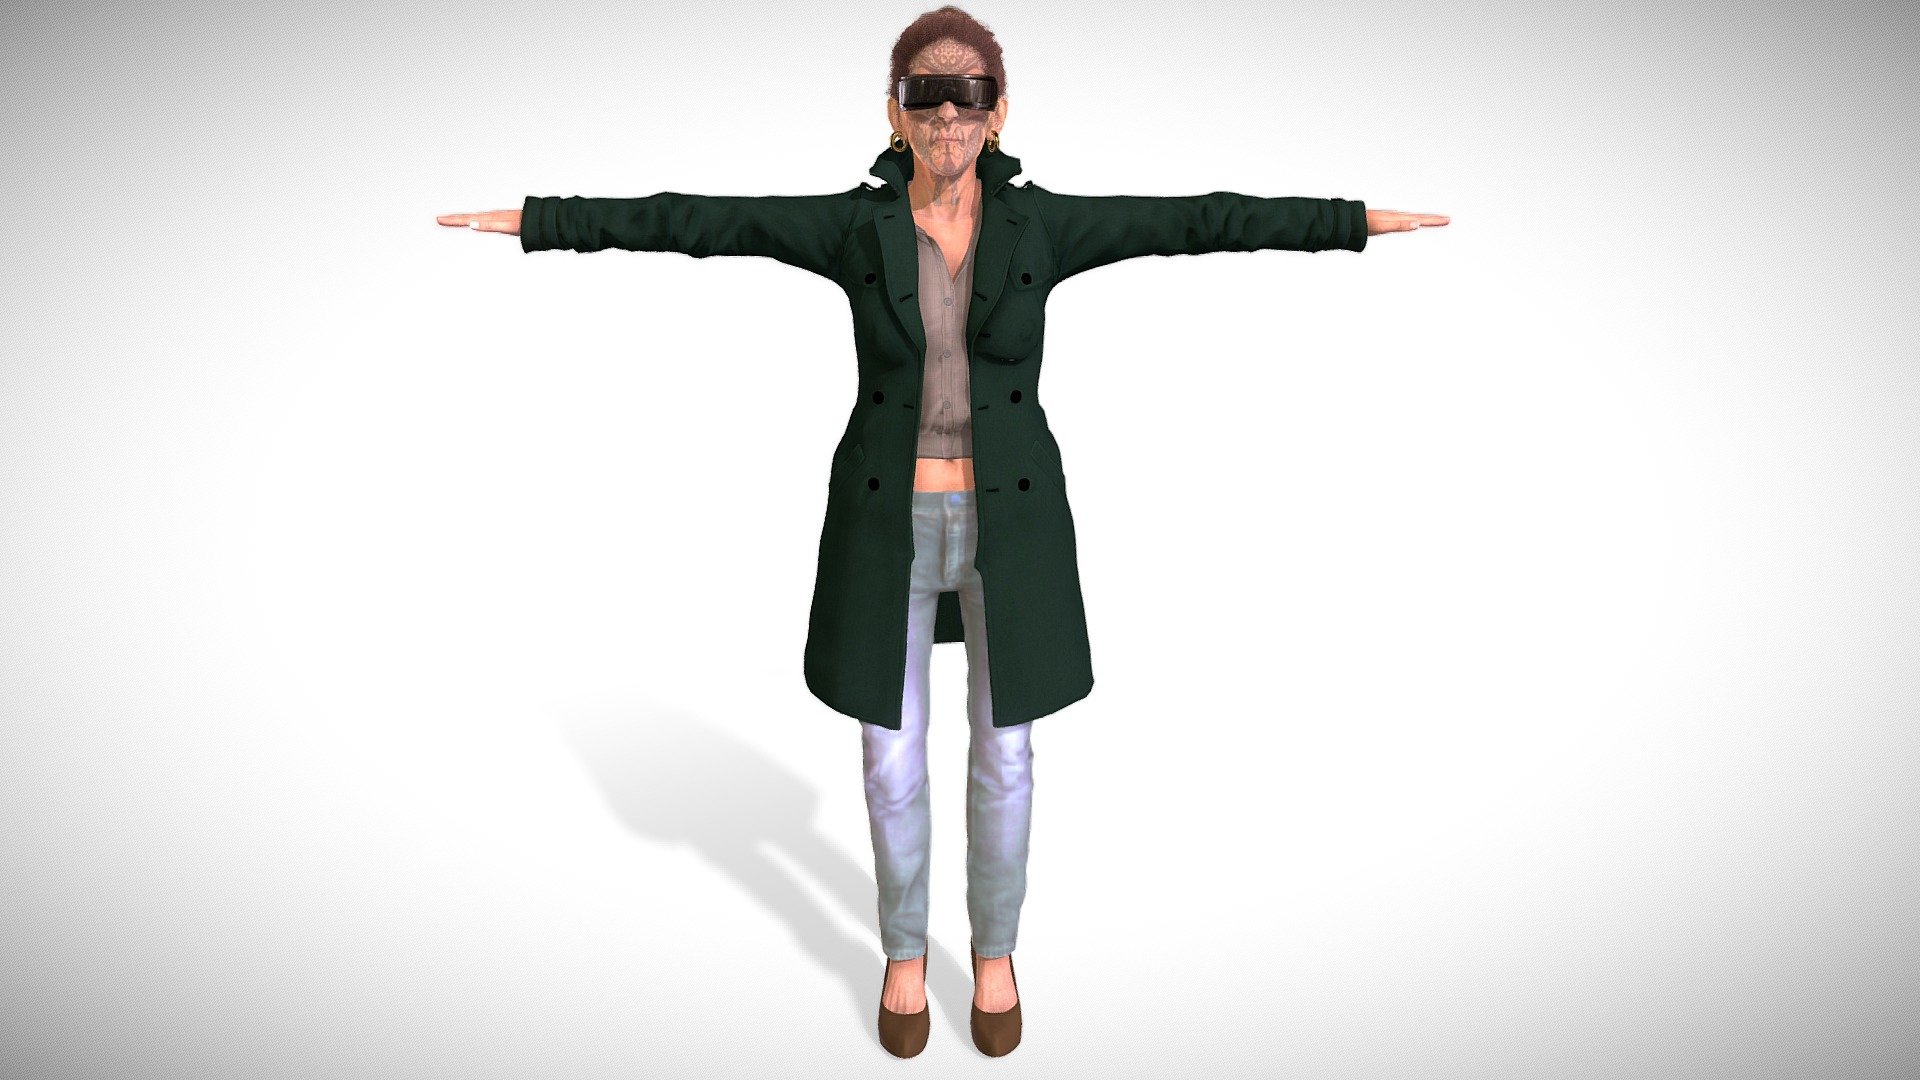 Short Story:

A relentless bounty hunter with exceptional shooting skills, Betty became a bounty hunter to make a living after growing up in a tough environment.

Product description:




T-pose

Game ready

low poly

Rigged character

Facial Blendshapes

Full Clothed

Realistic hair

FBX embedded textures

www.luciddreamsvisuals.com.ar - tattooed Woman Bounty Hunter - Rig & blendshapes - Buy Royalty Free 3D model by Lucid Dreams (@vjluciddreams) 3d model